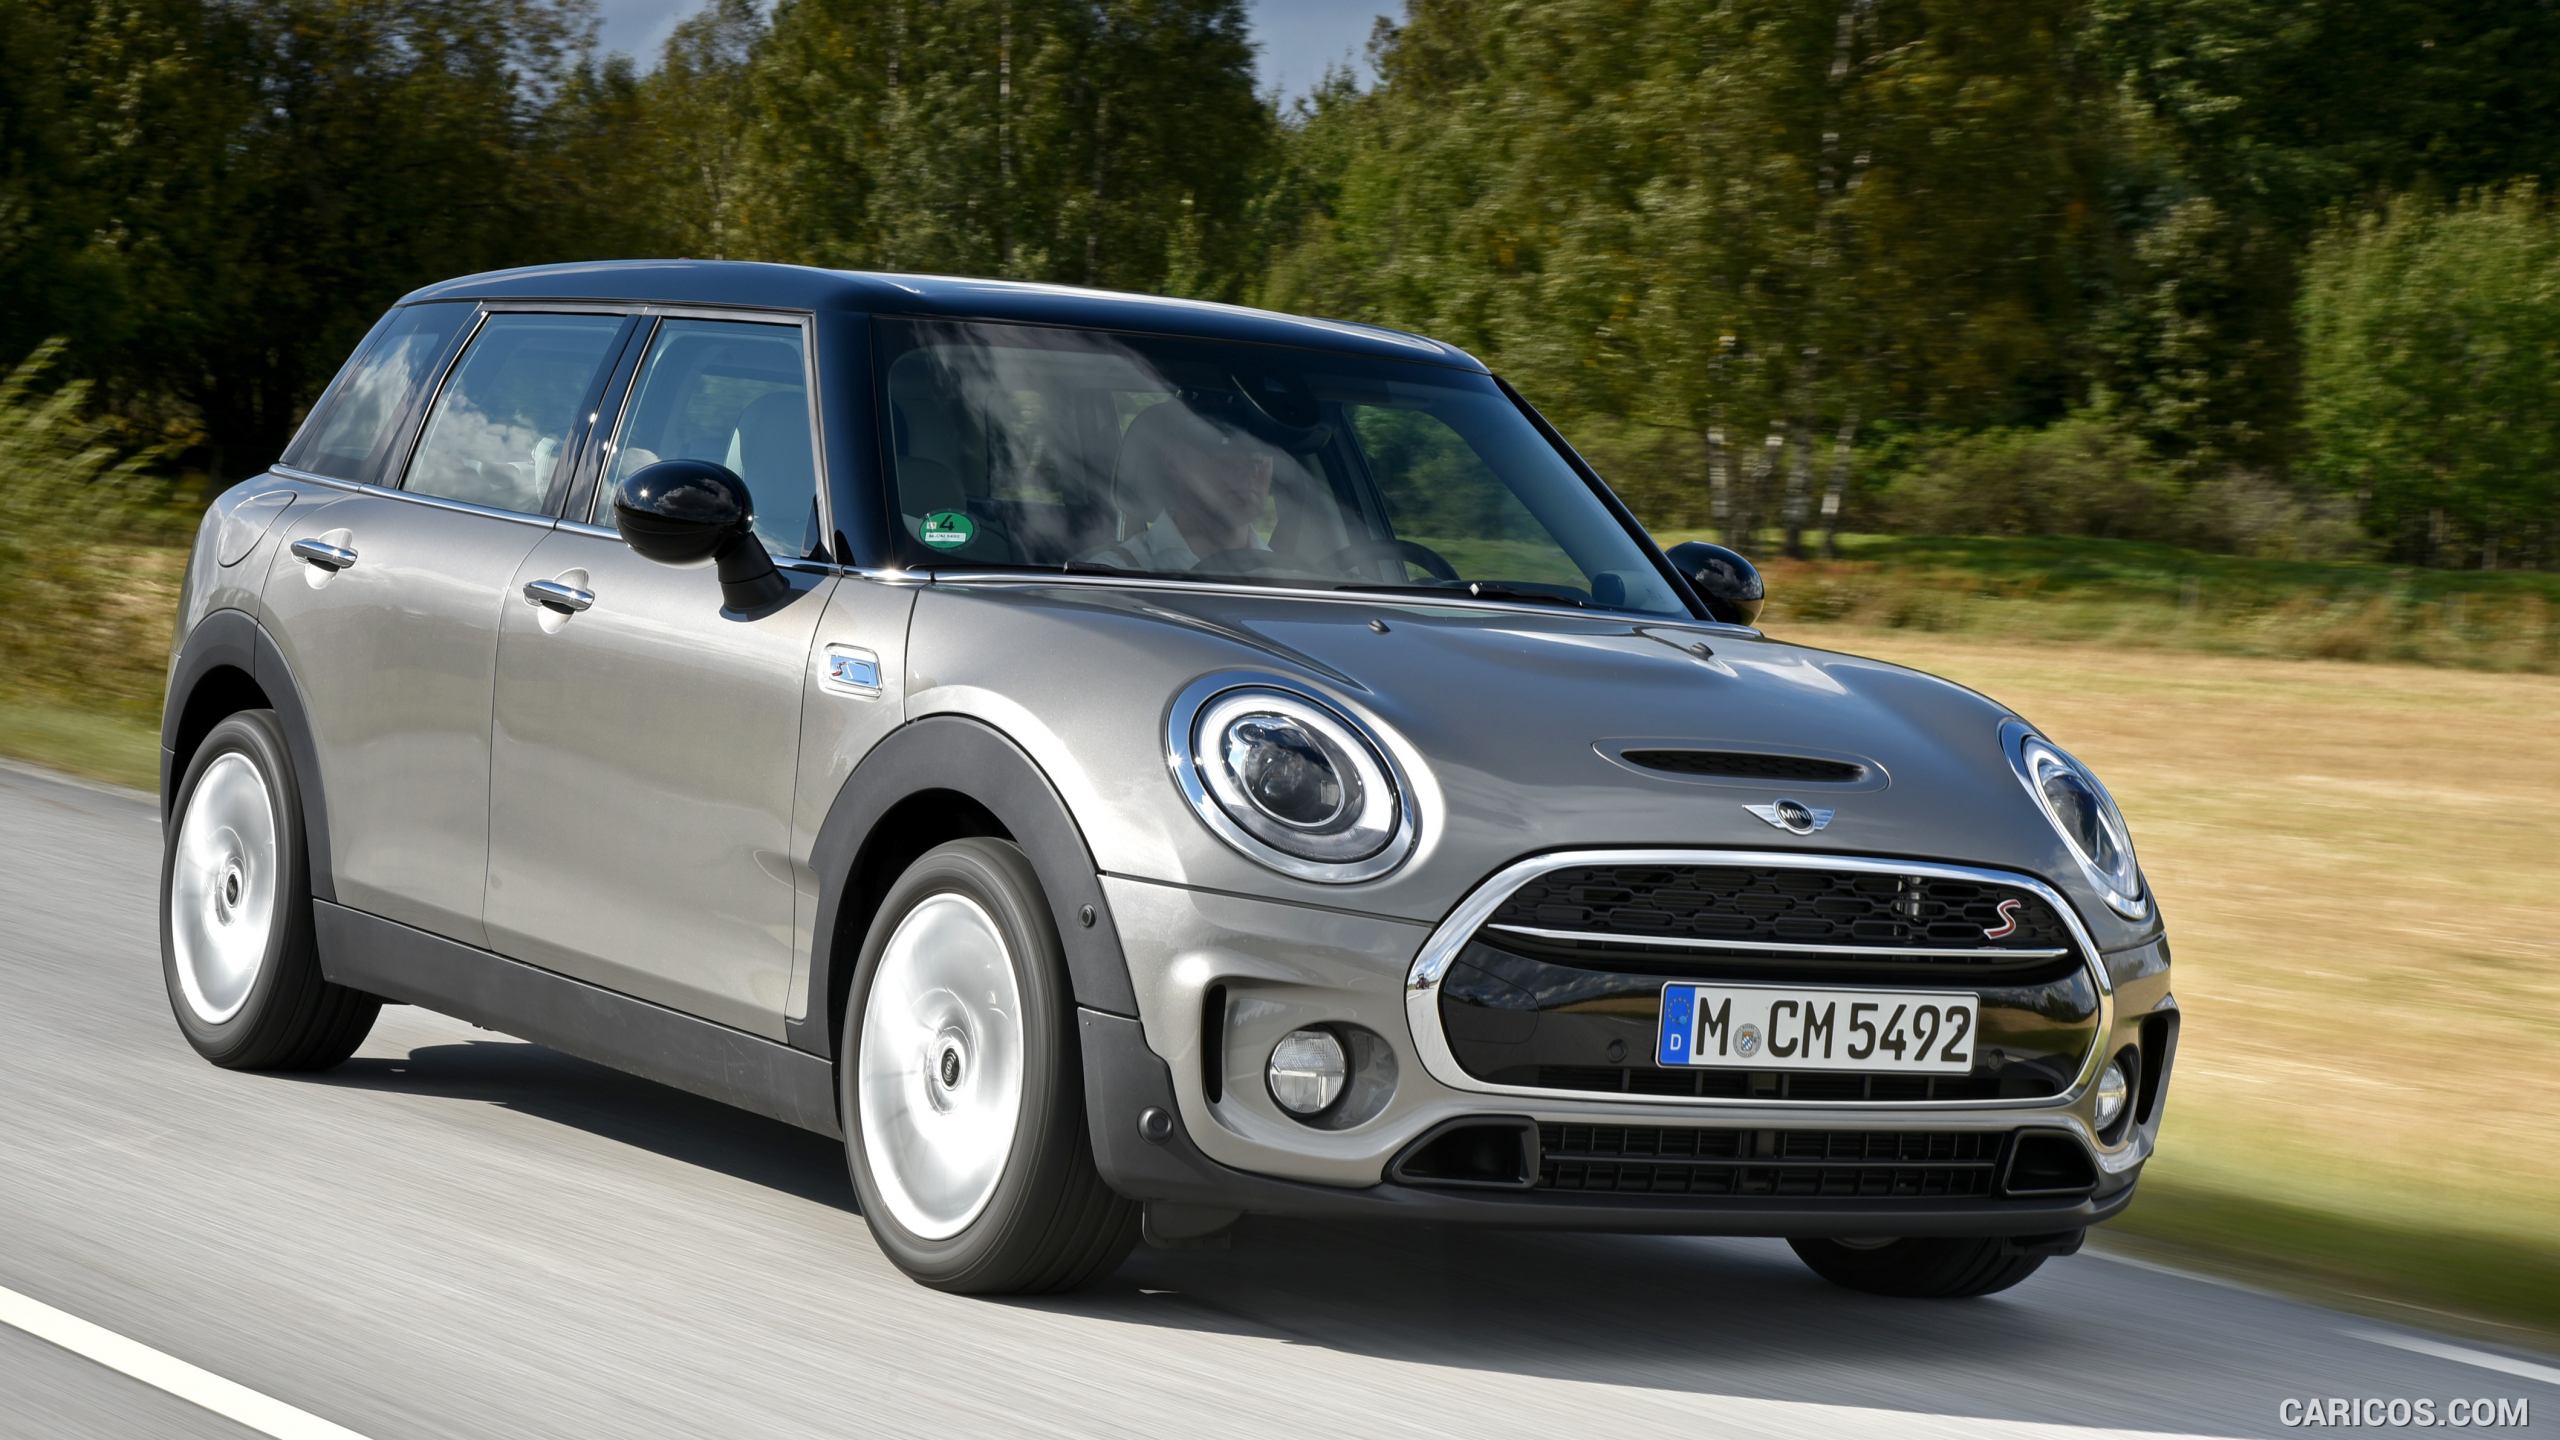 2016 MINI Cooper S Clubman in Metallic Melting Silver - Front, #120 of 380